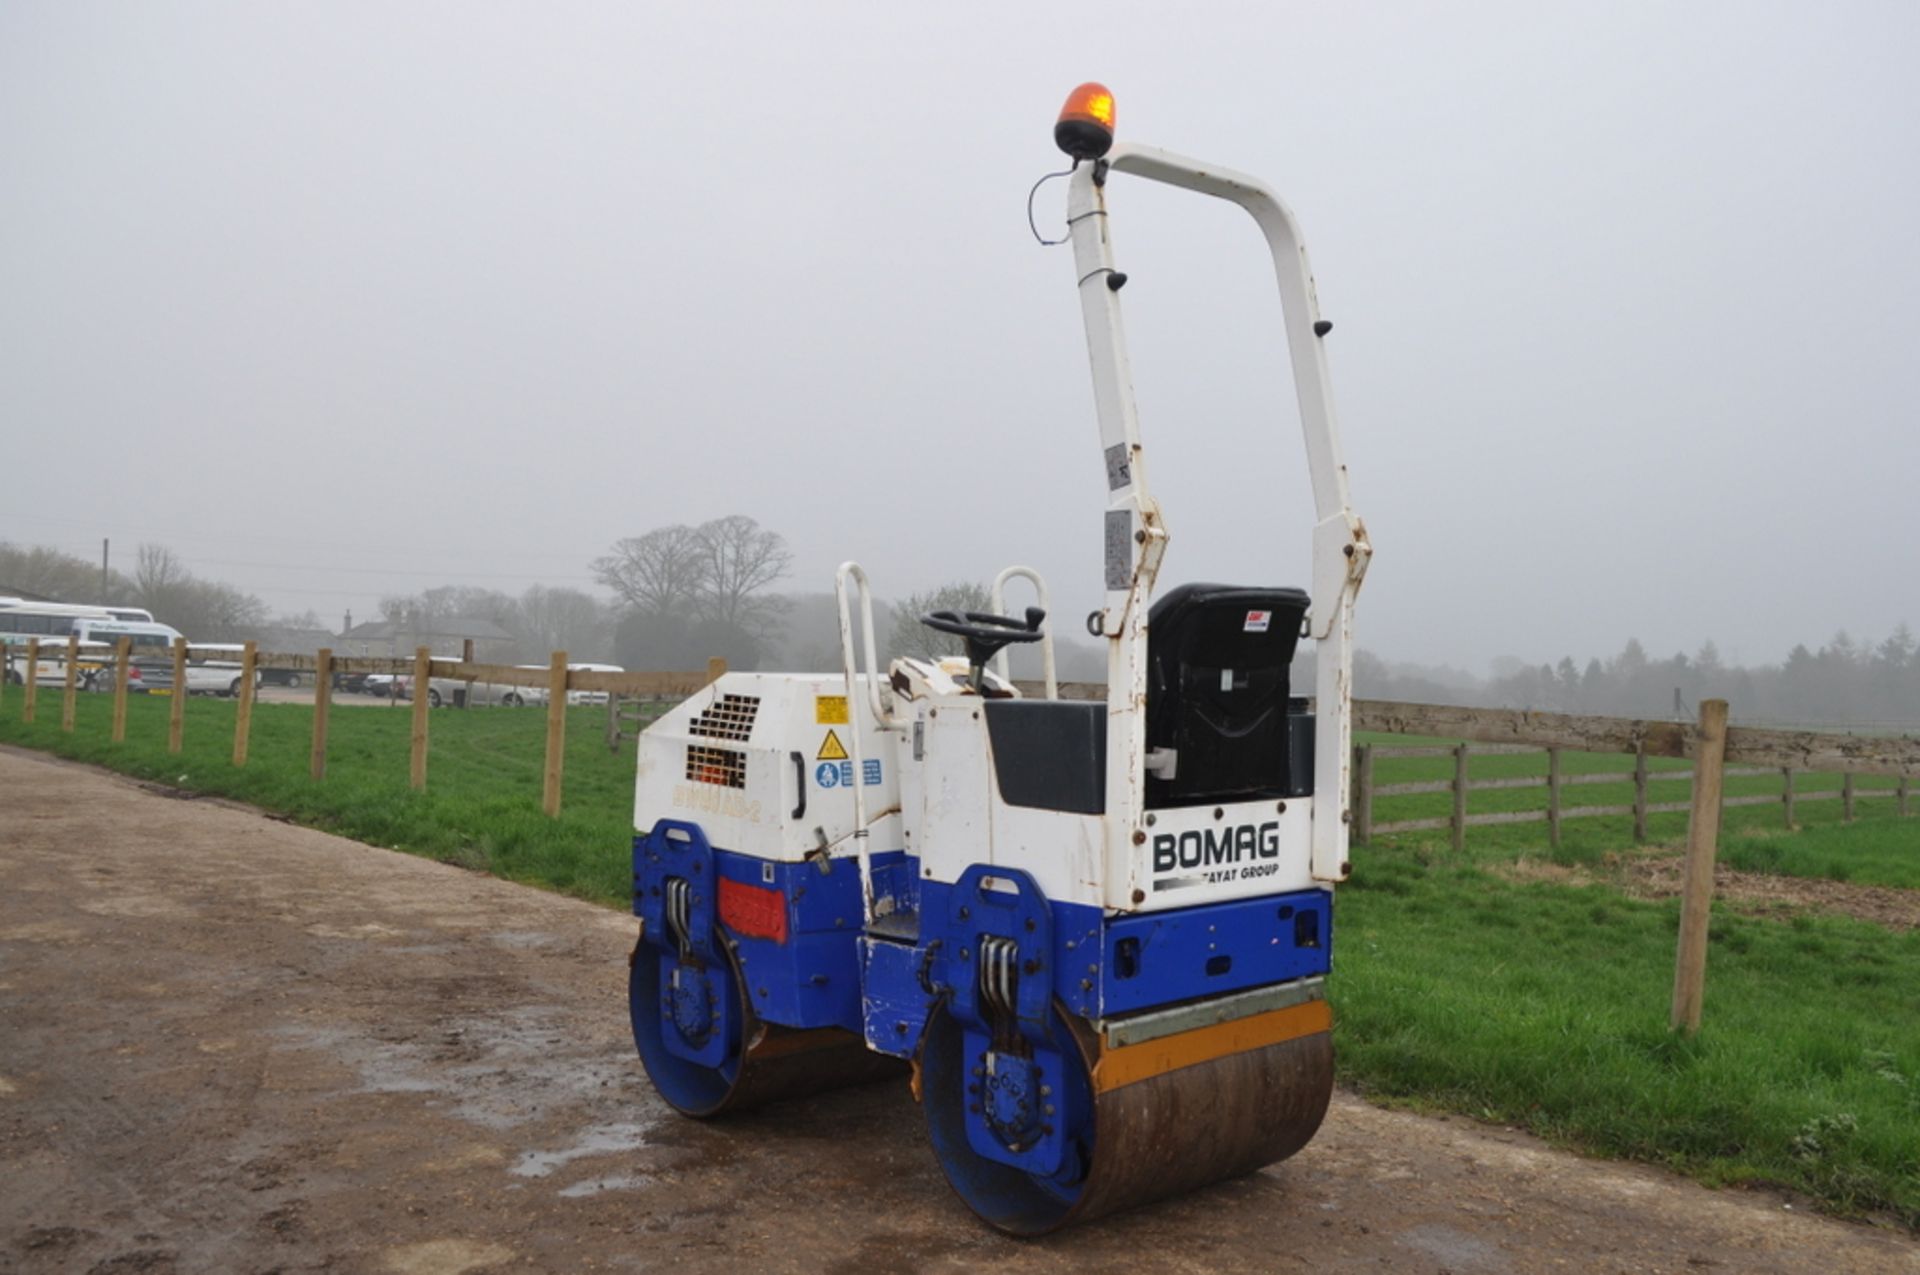 BOMAG BW 80 AD-2 Roller 2007 - Image 8 of 10